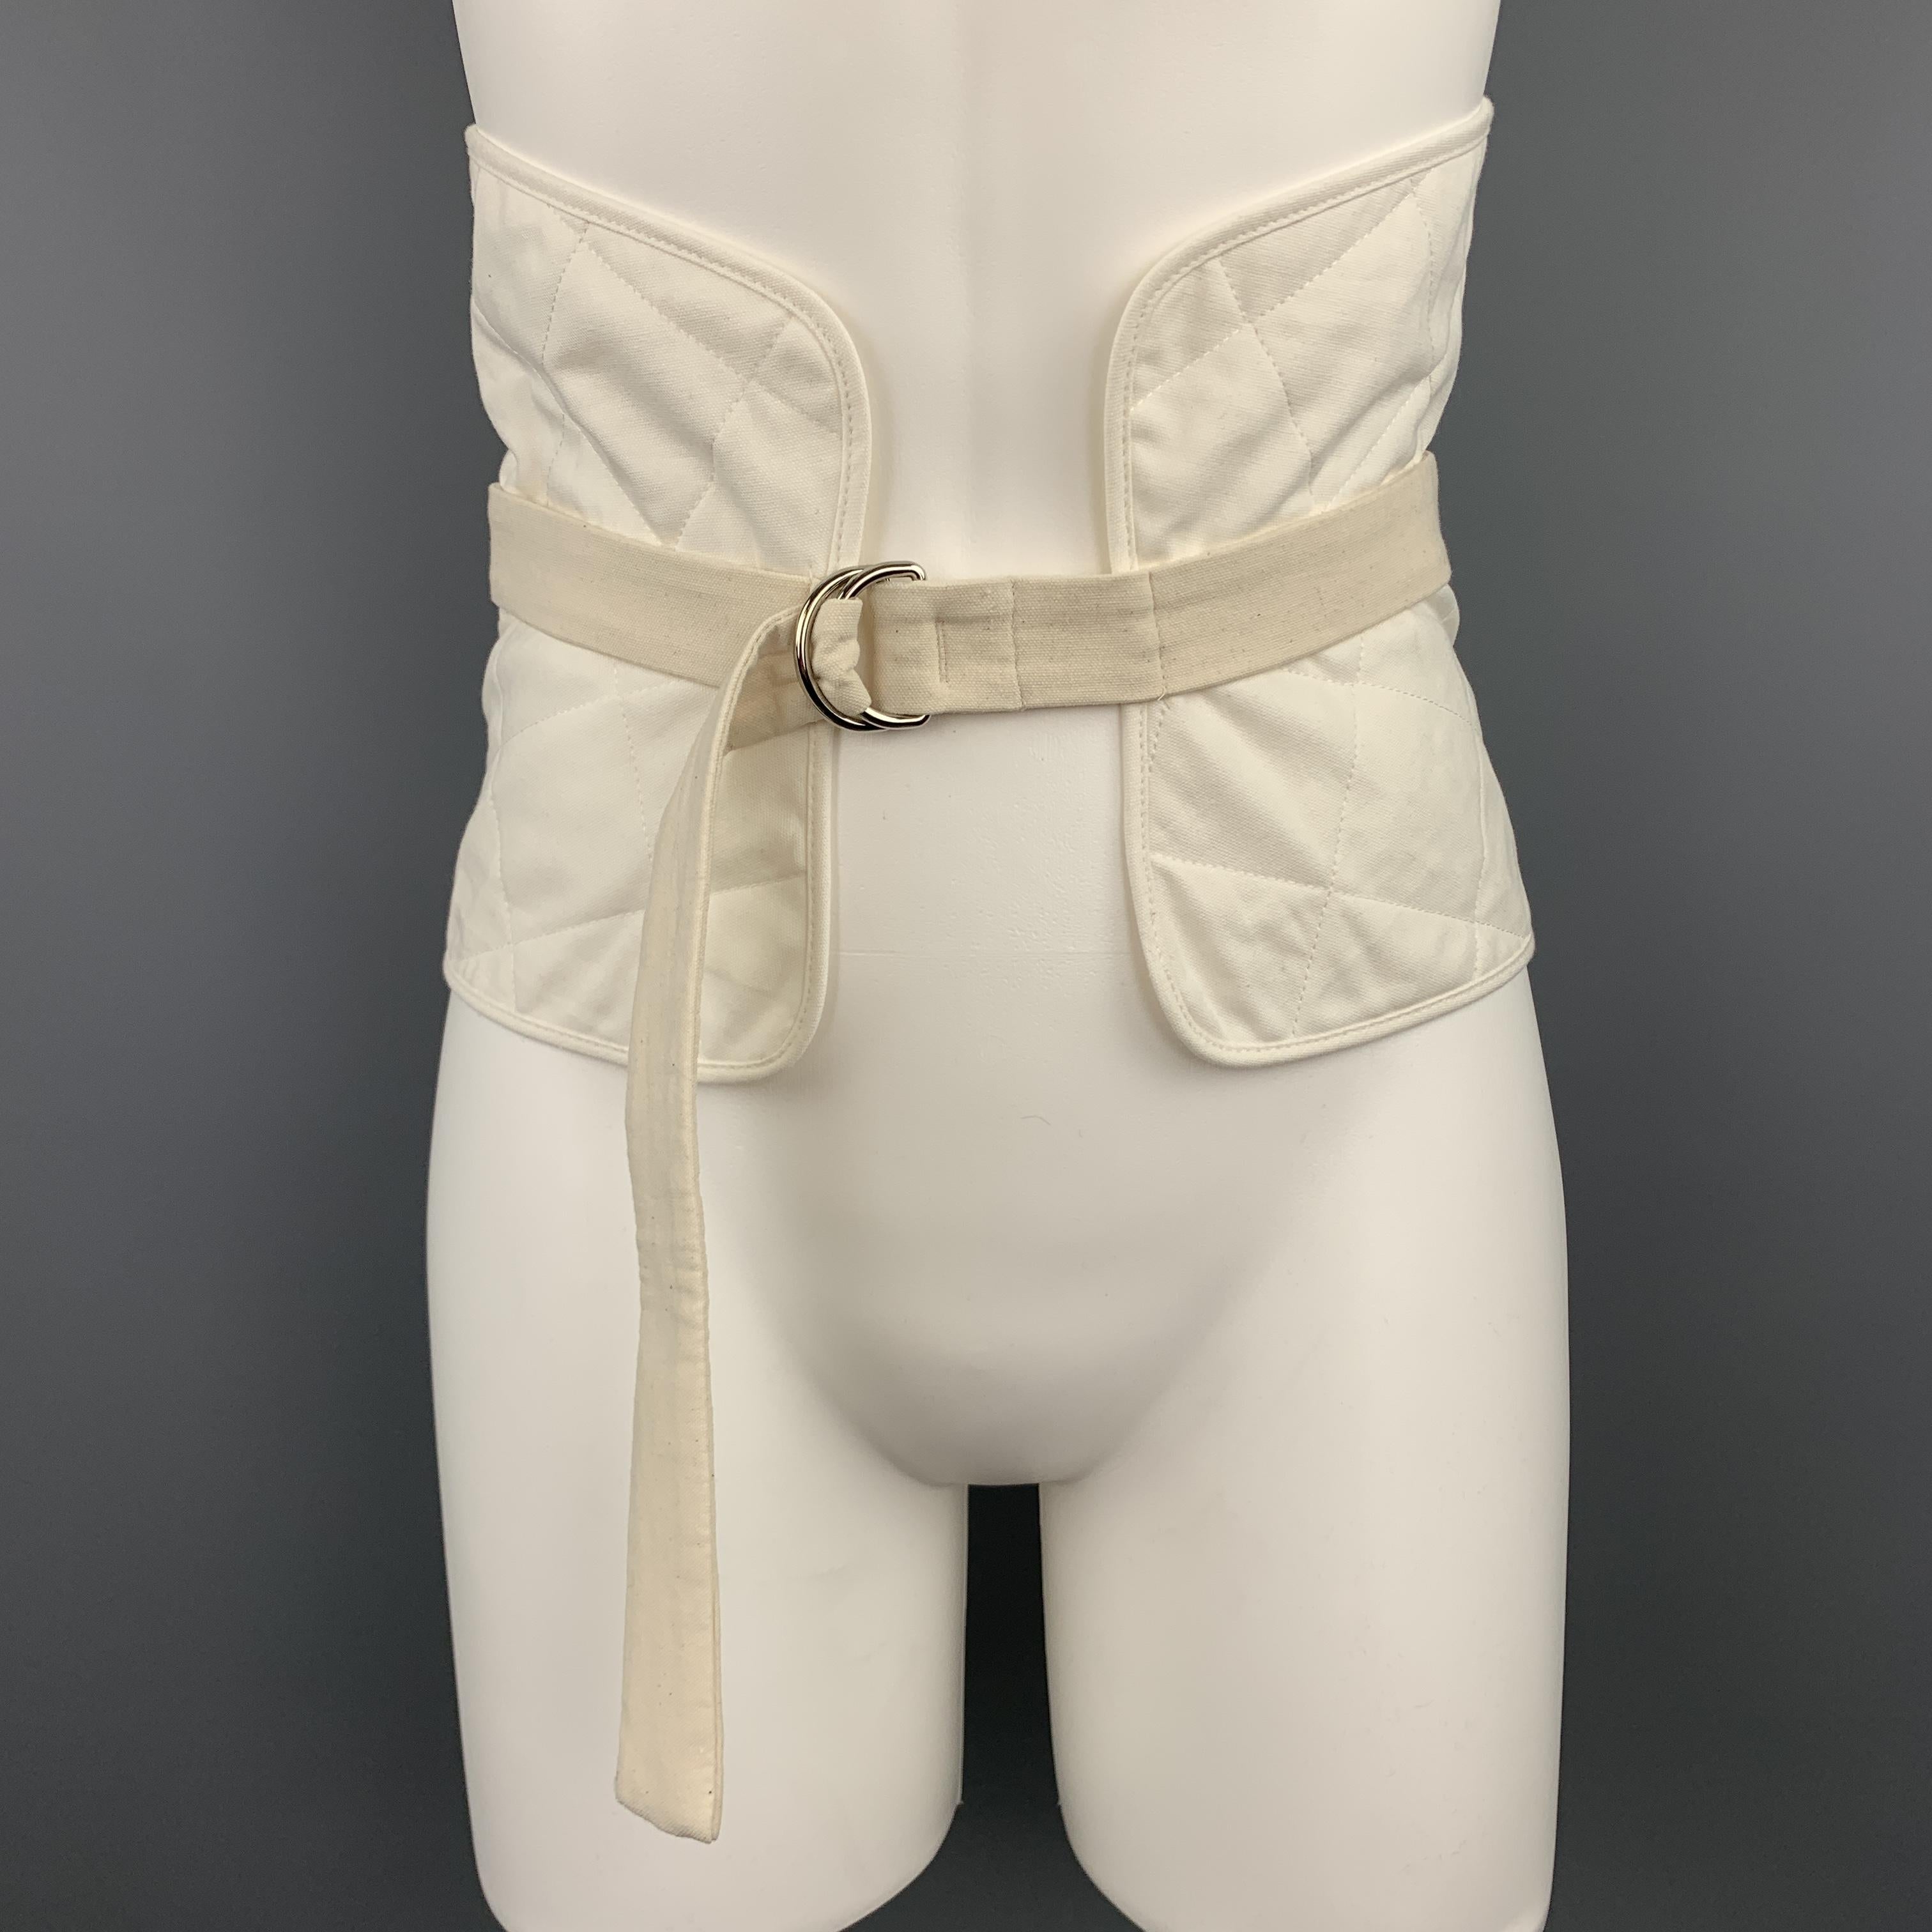 JIL SANDER Resort 2018 waist belt comes features a thick quilted wool mohair blend canvas band with adjustable belt overlay with D loop closures. Made in Italy.

New with Tags.
Marked: IT 38
Original Retail Price: $470.00

Measurements:

Length: 40